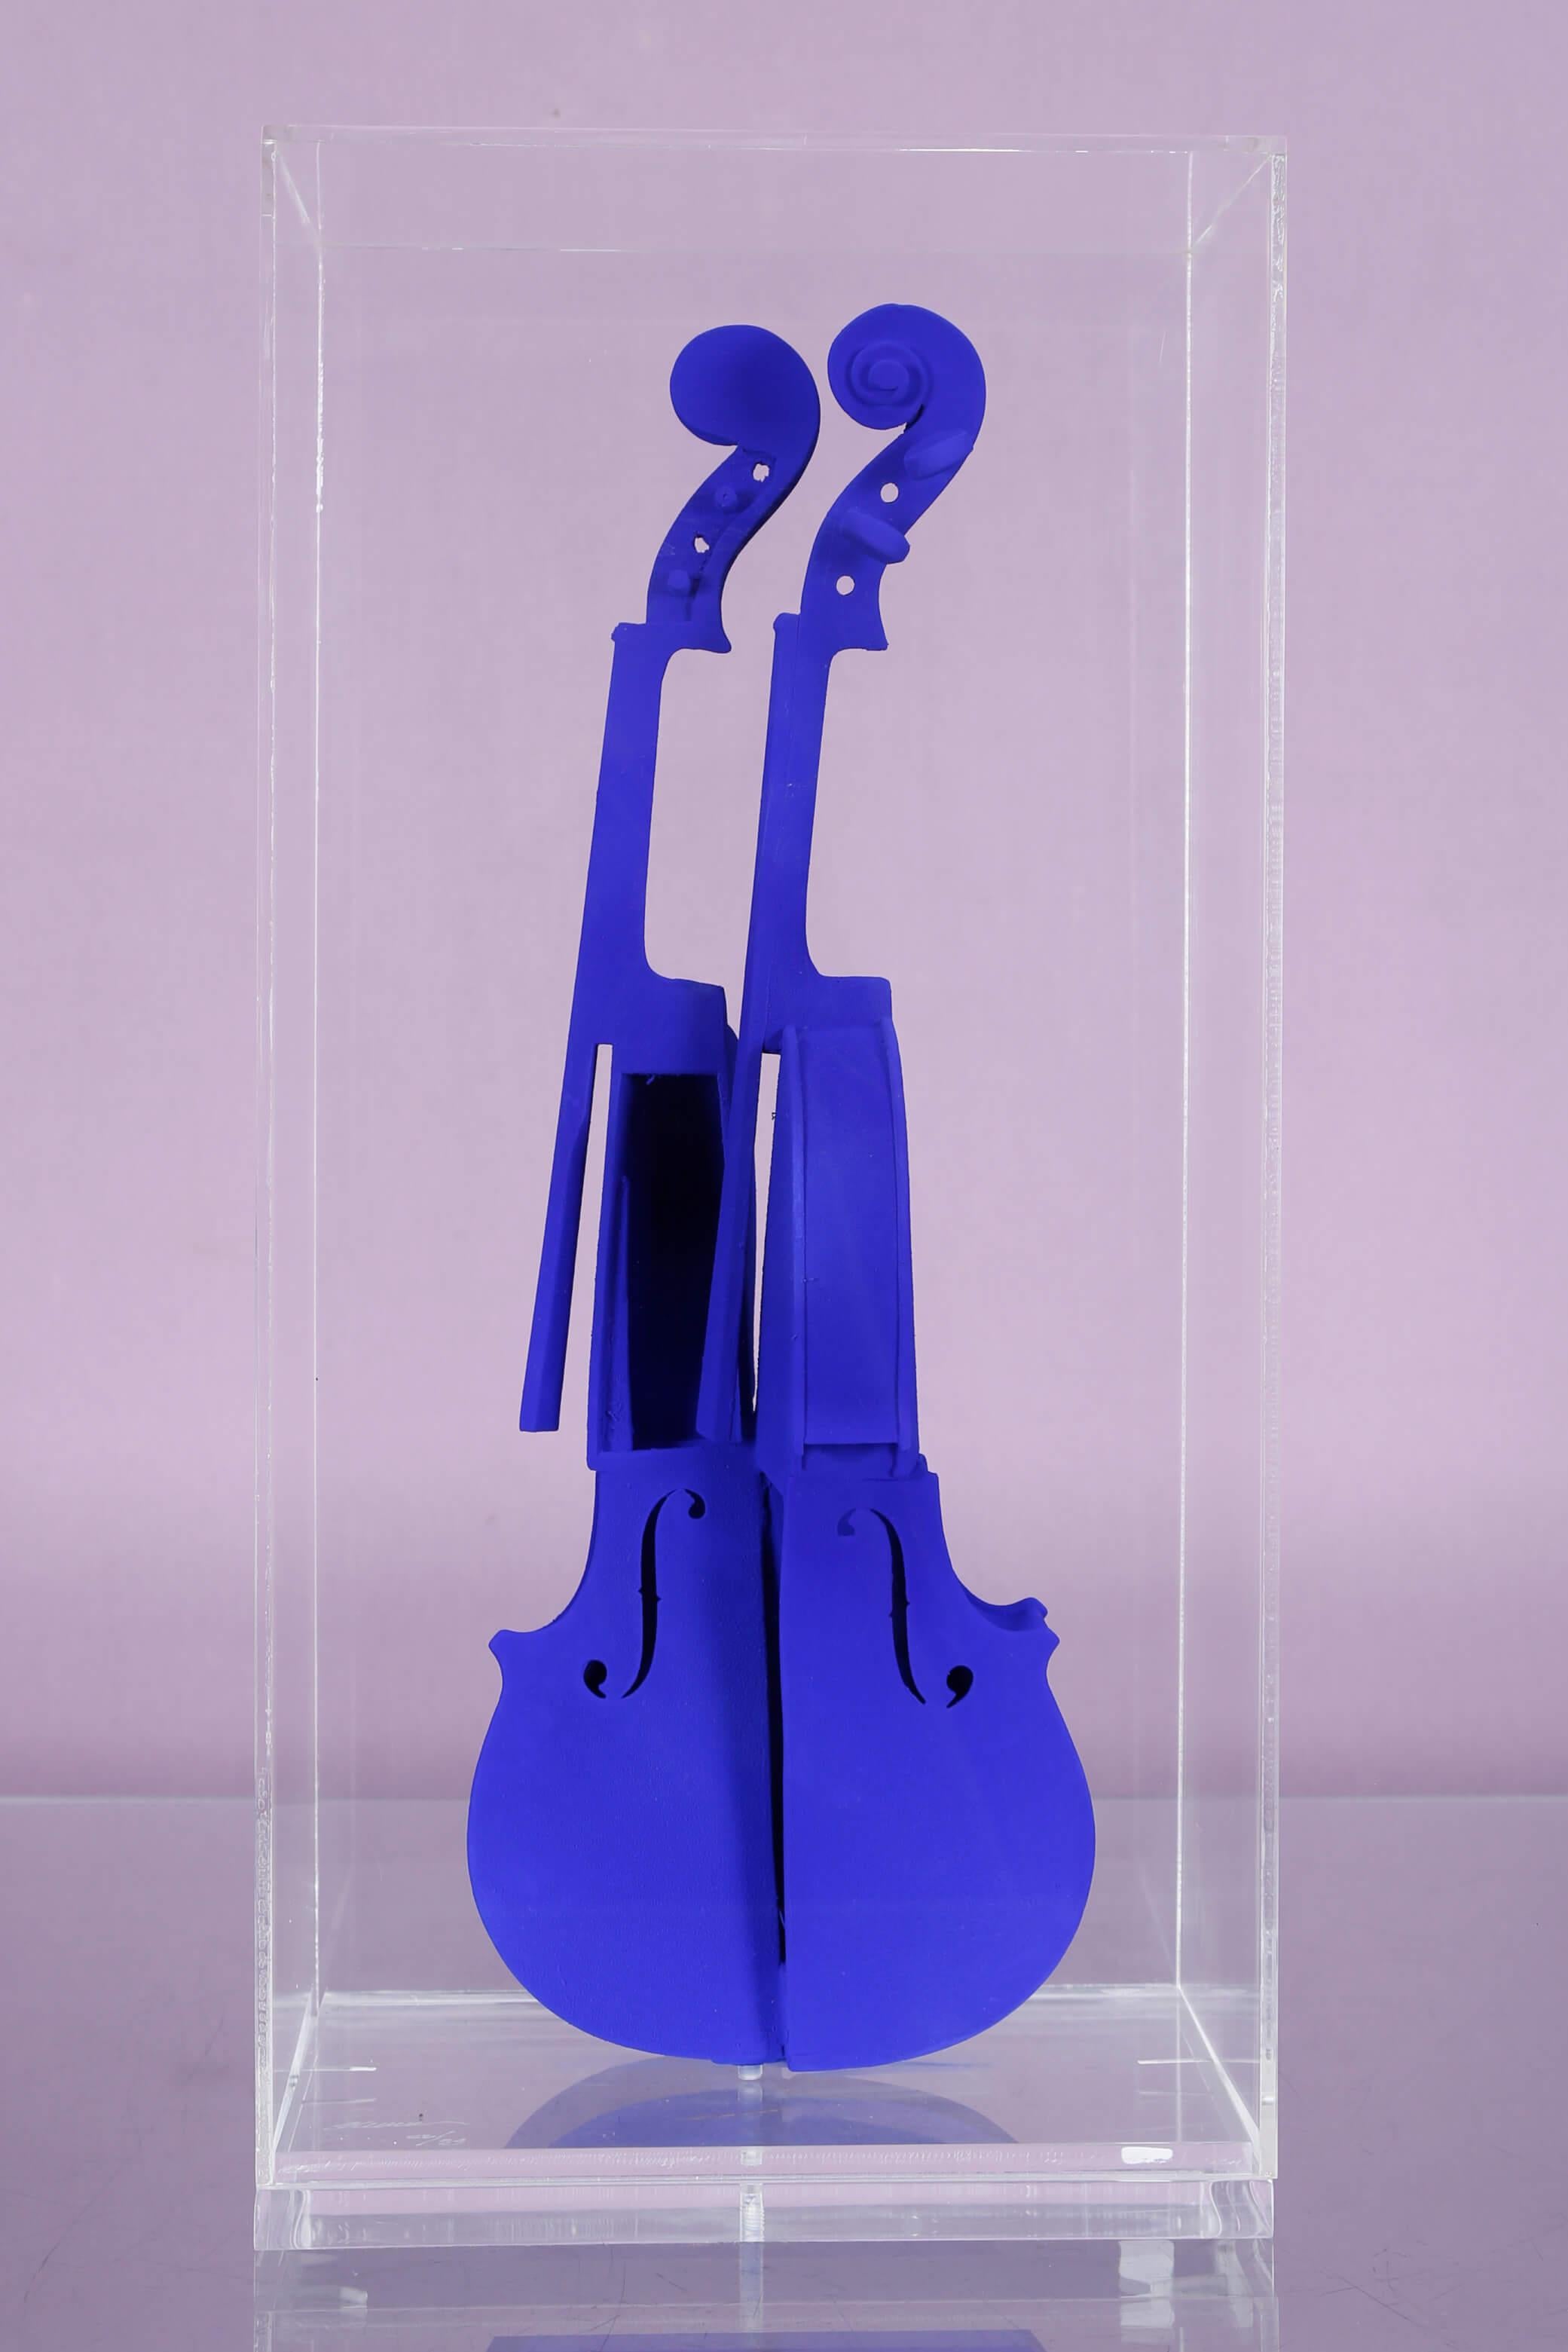 Arman 
1996
Cut of violin, wood, and blue pigment in a Plexiglas box
Edition of 90 from I/XC to XC/XC + 9 AP from EA I/IX to EA IX/IX
Signed and numbered in the Plexiglas
Recorded at Fondation A.R.M.A.N in Geneva under NR 5400
Recorded at Studio